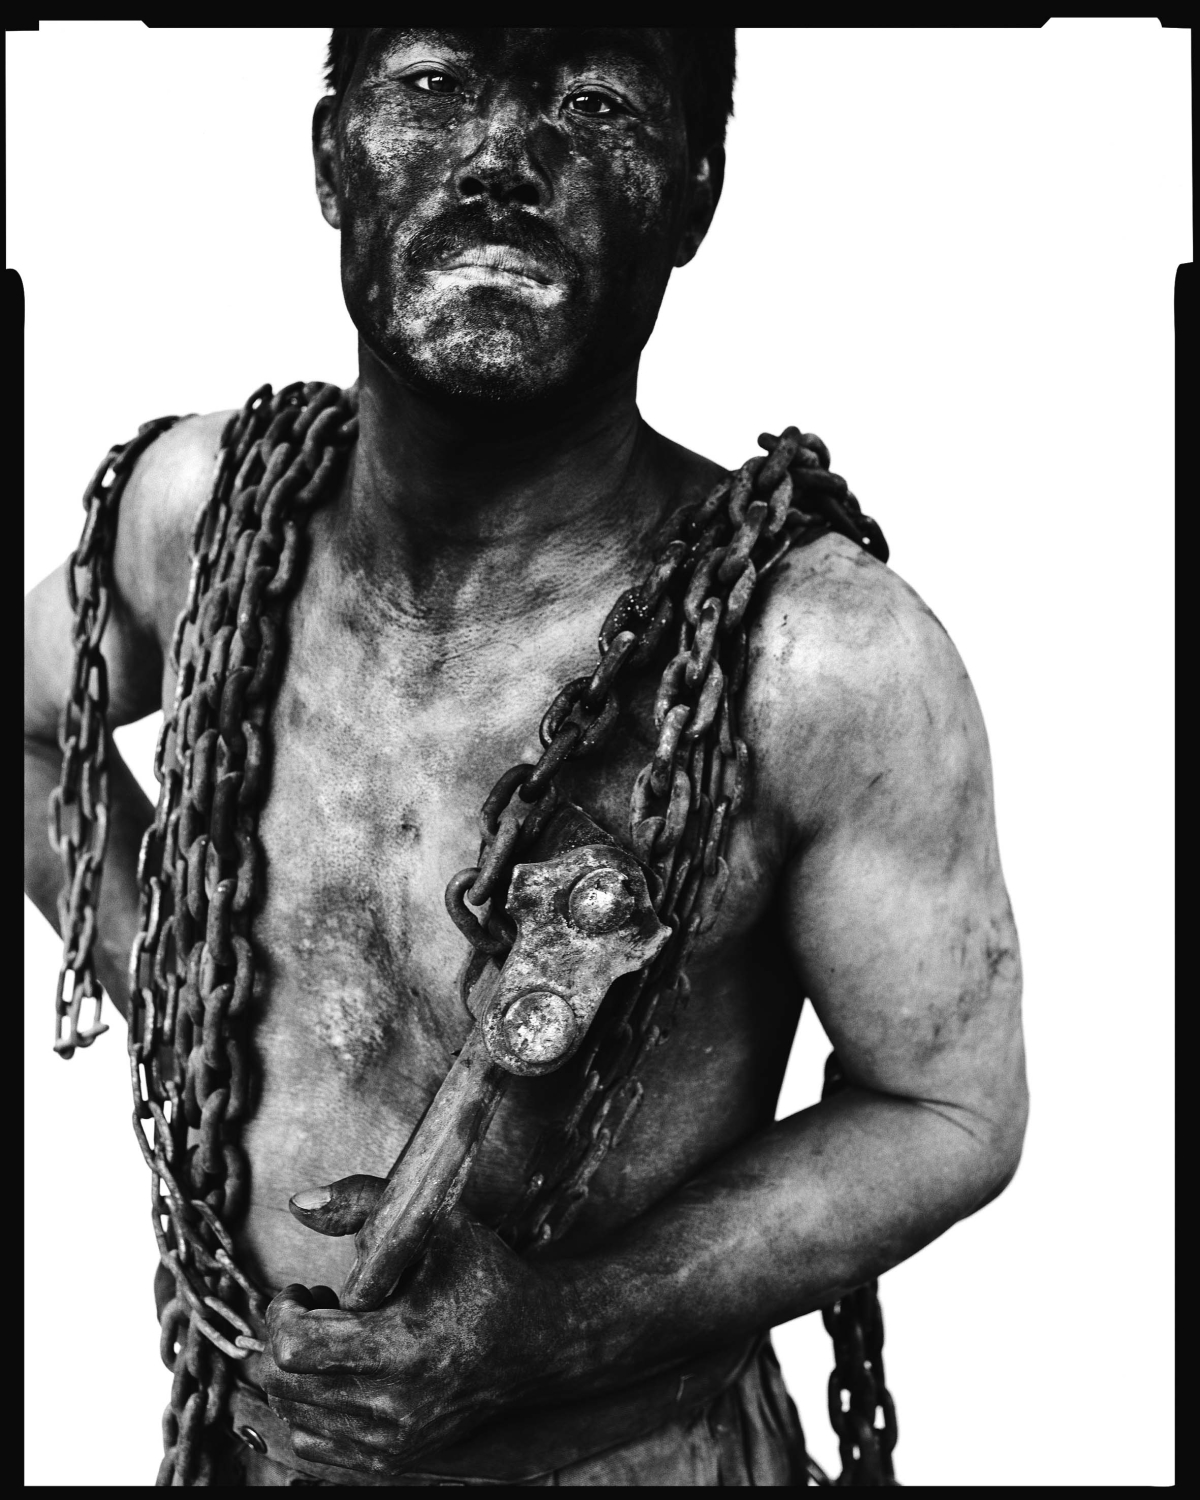 Black-and-white photograph of a three-quarter view of a bare-chested man covered in soot holding a large tool; heavy chains are draped over his shoulders.